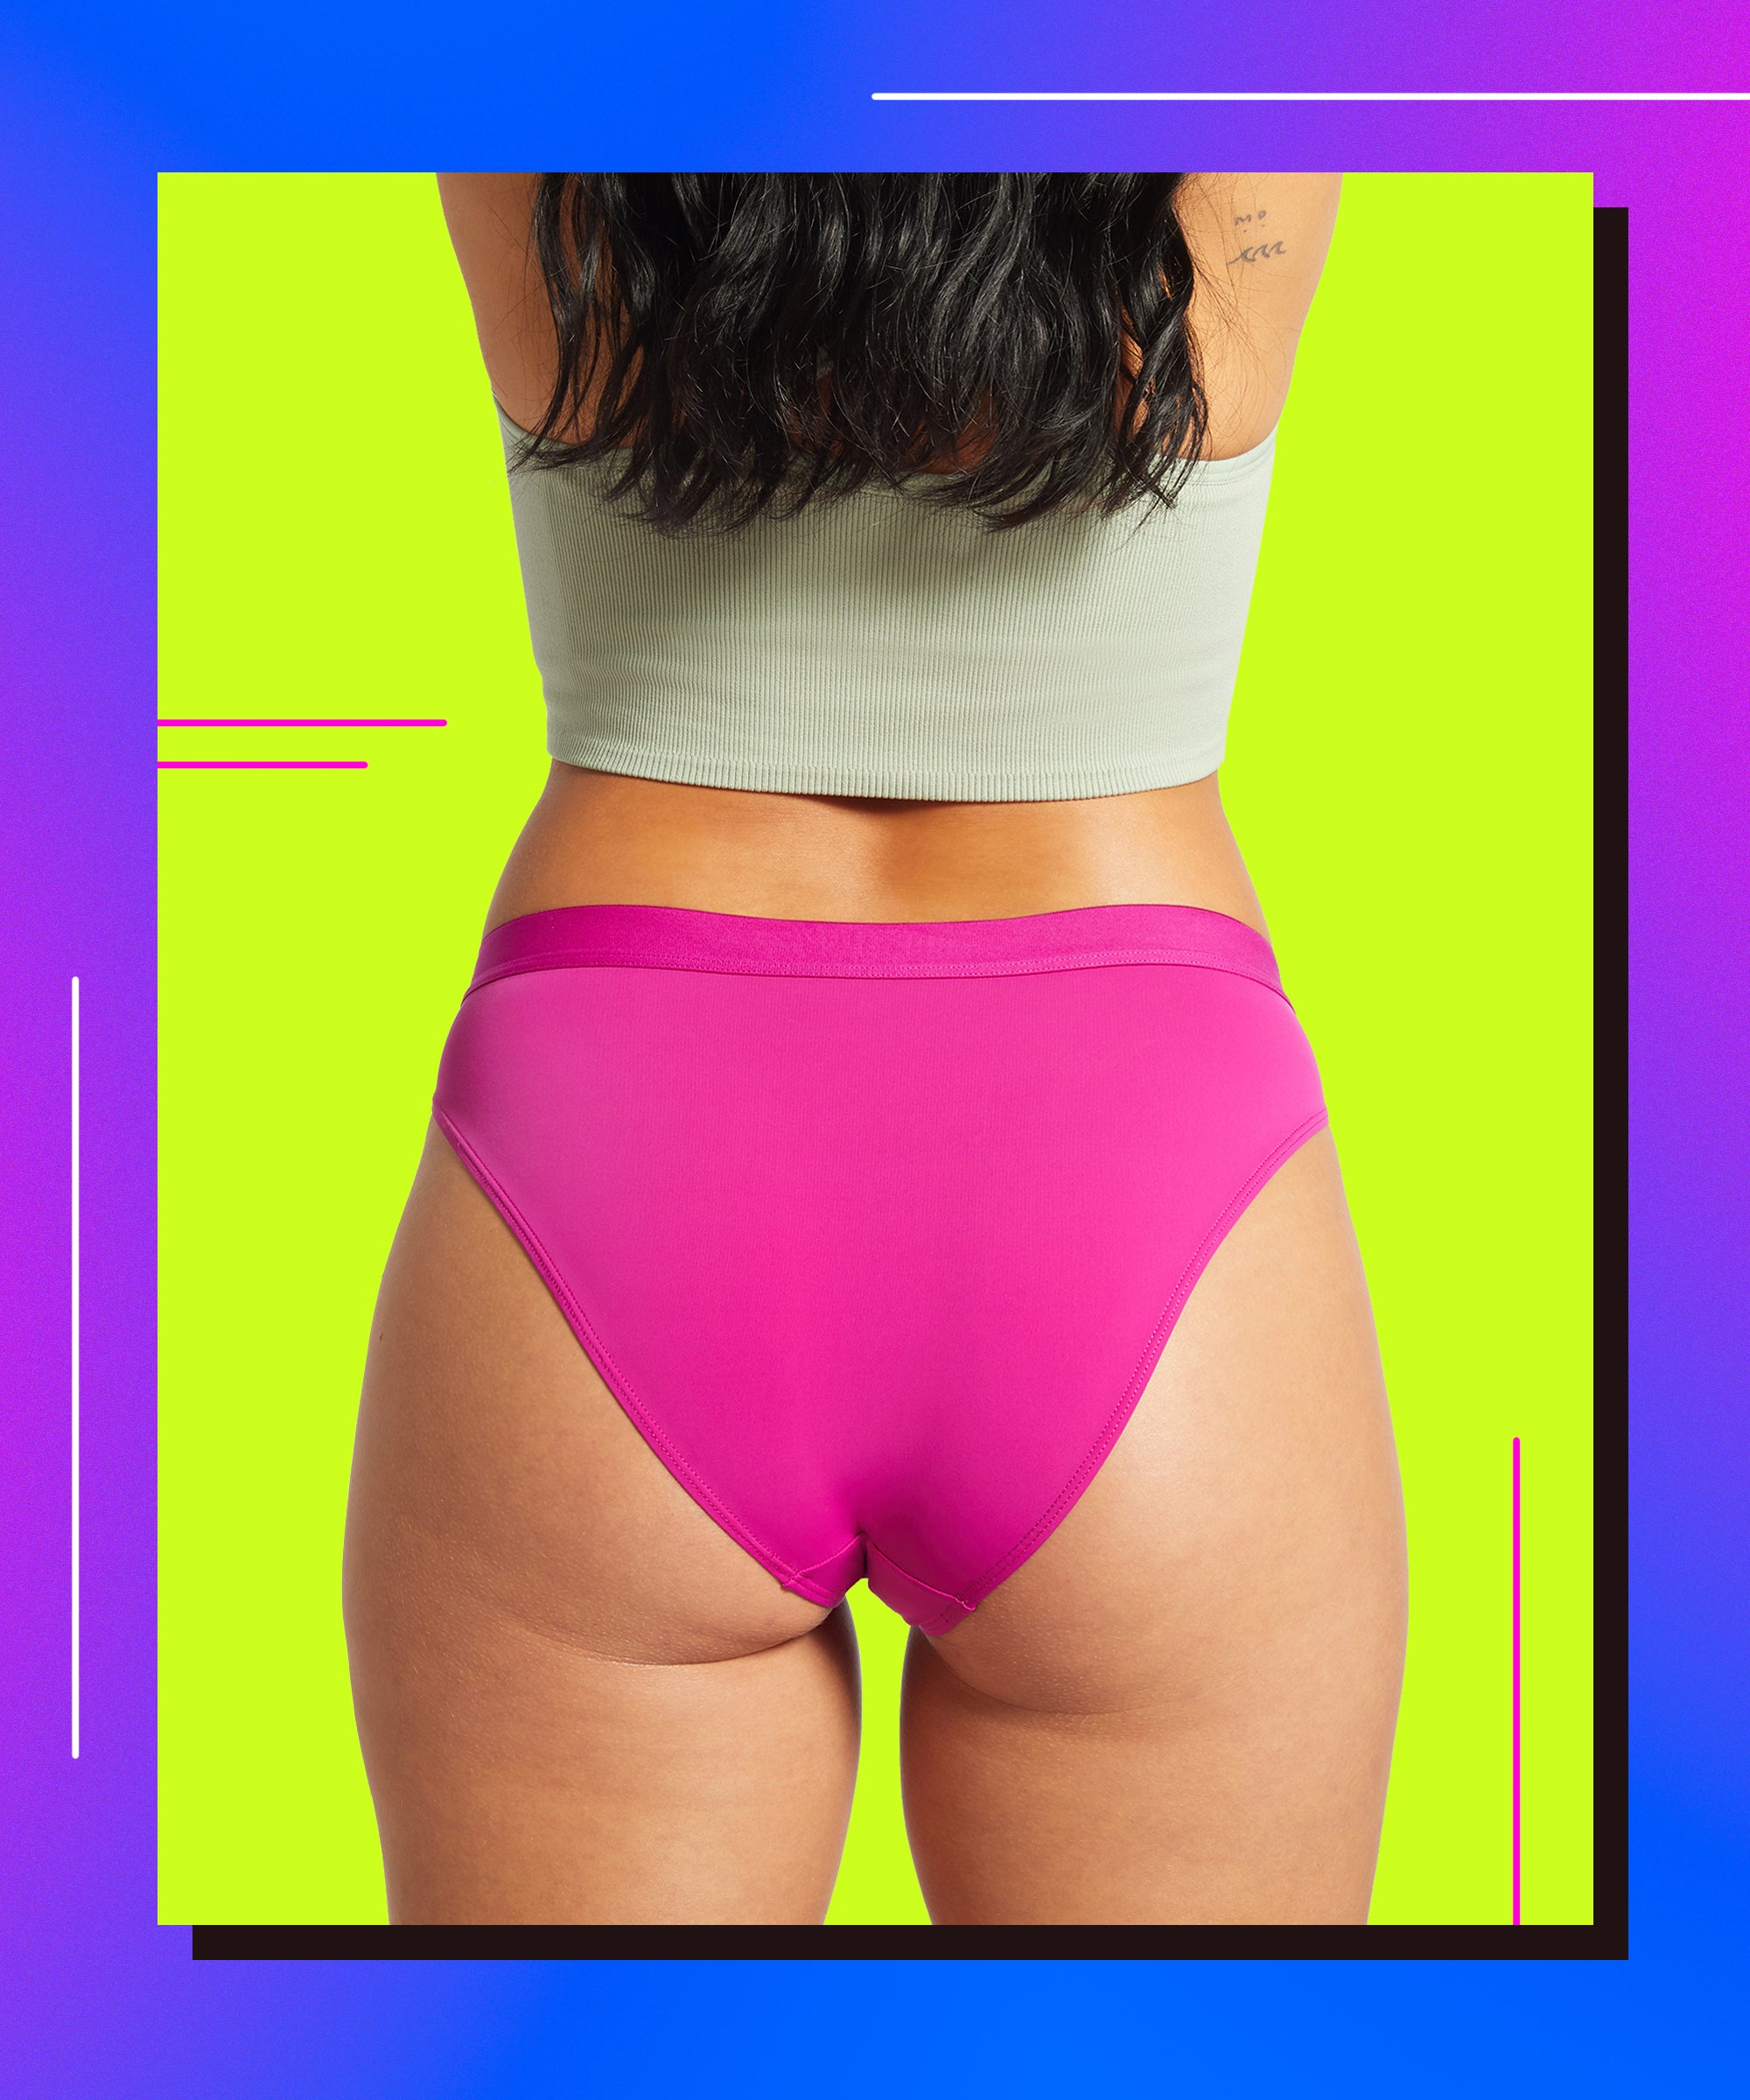 Parade Size-Inclusive Underwear Comfort Review 2020